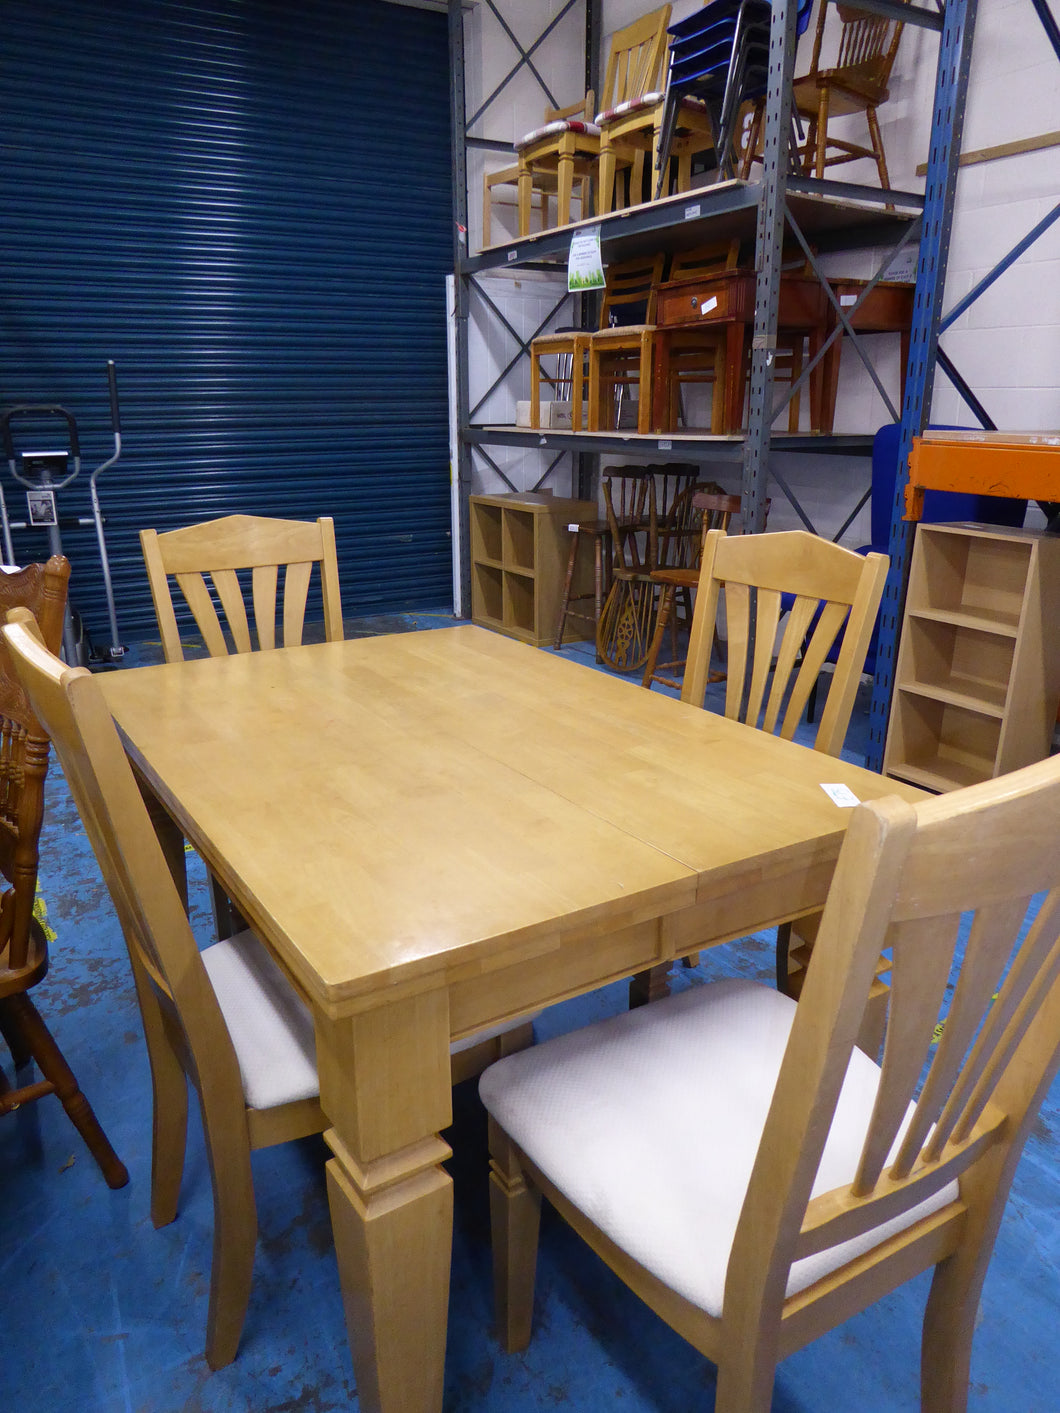 Extending Dining Table & 4 Chairs